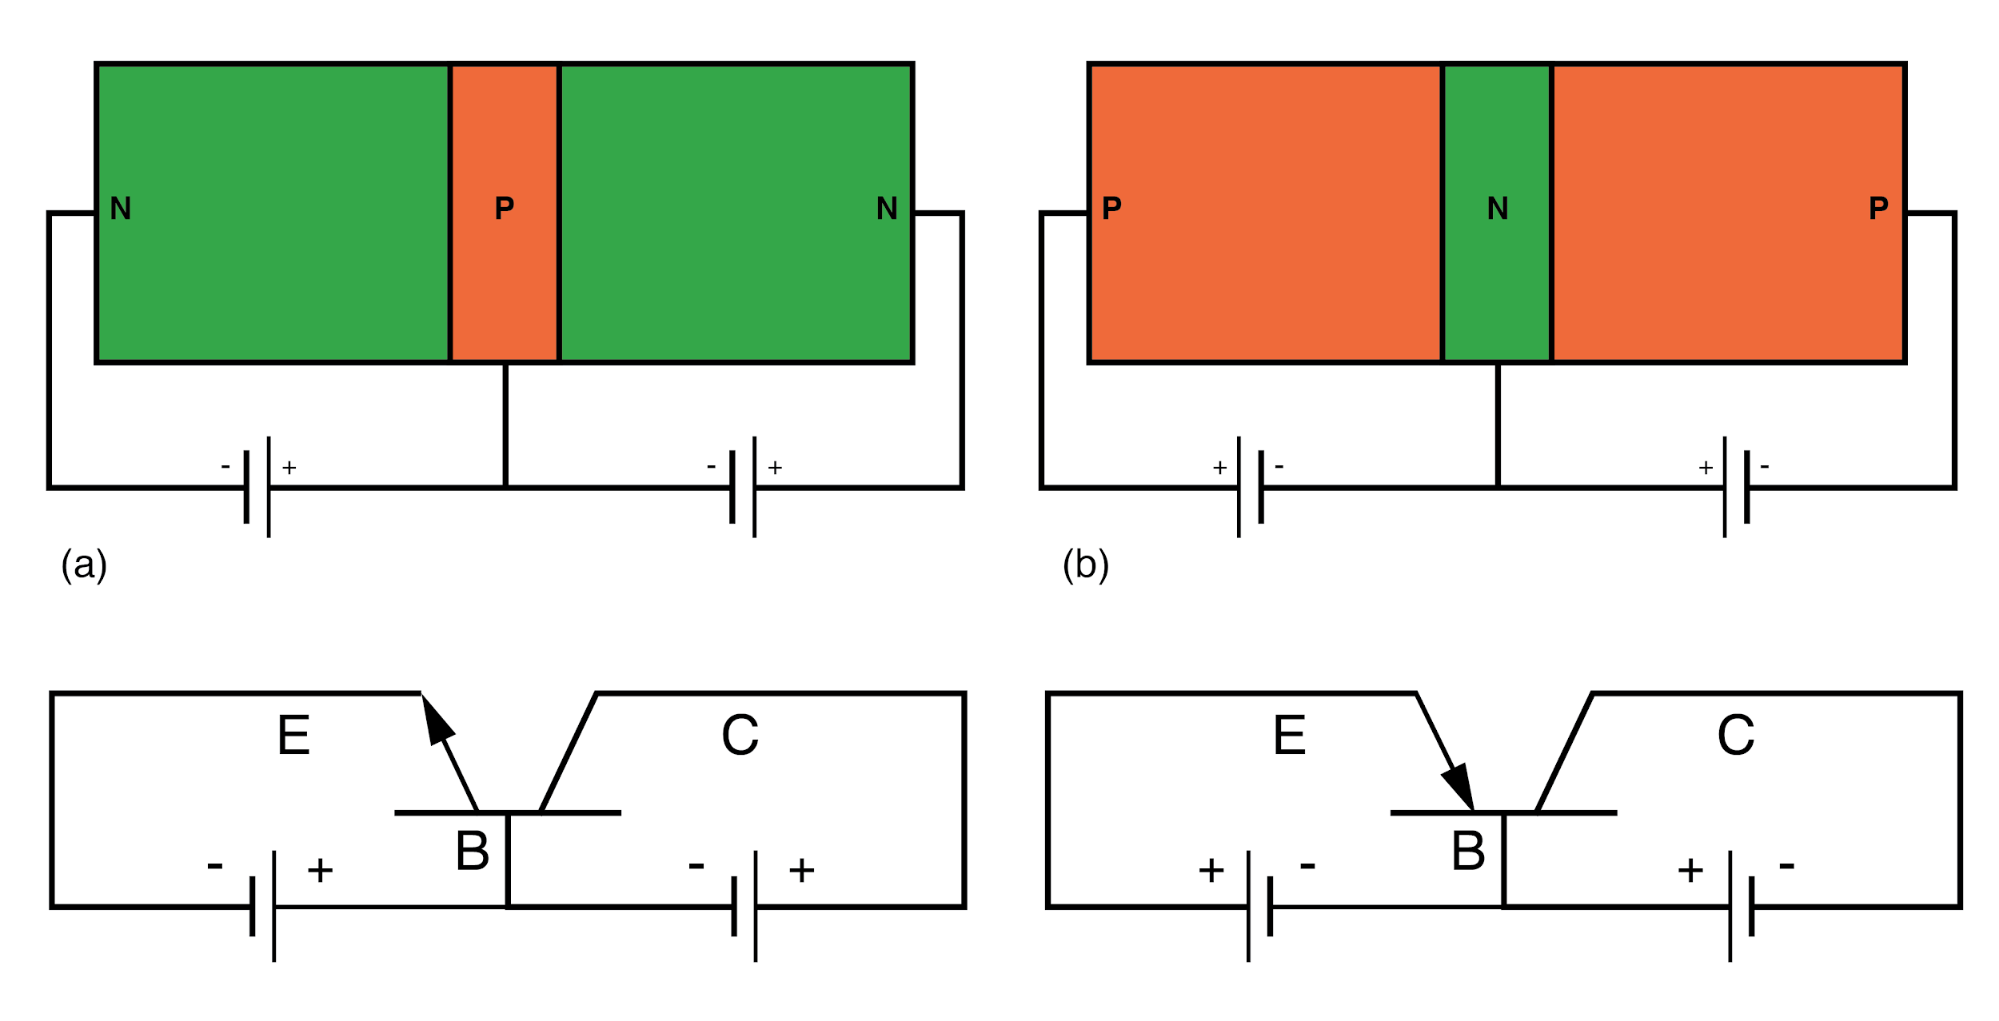 Compare NPN transistor at (a) with the PNP transistor at (b). Note direction of emitter arrow and supply polarity.